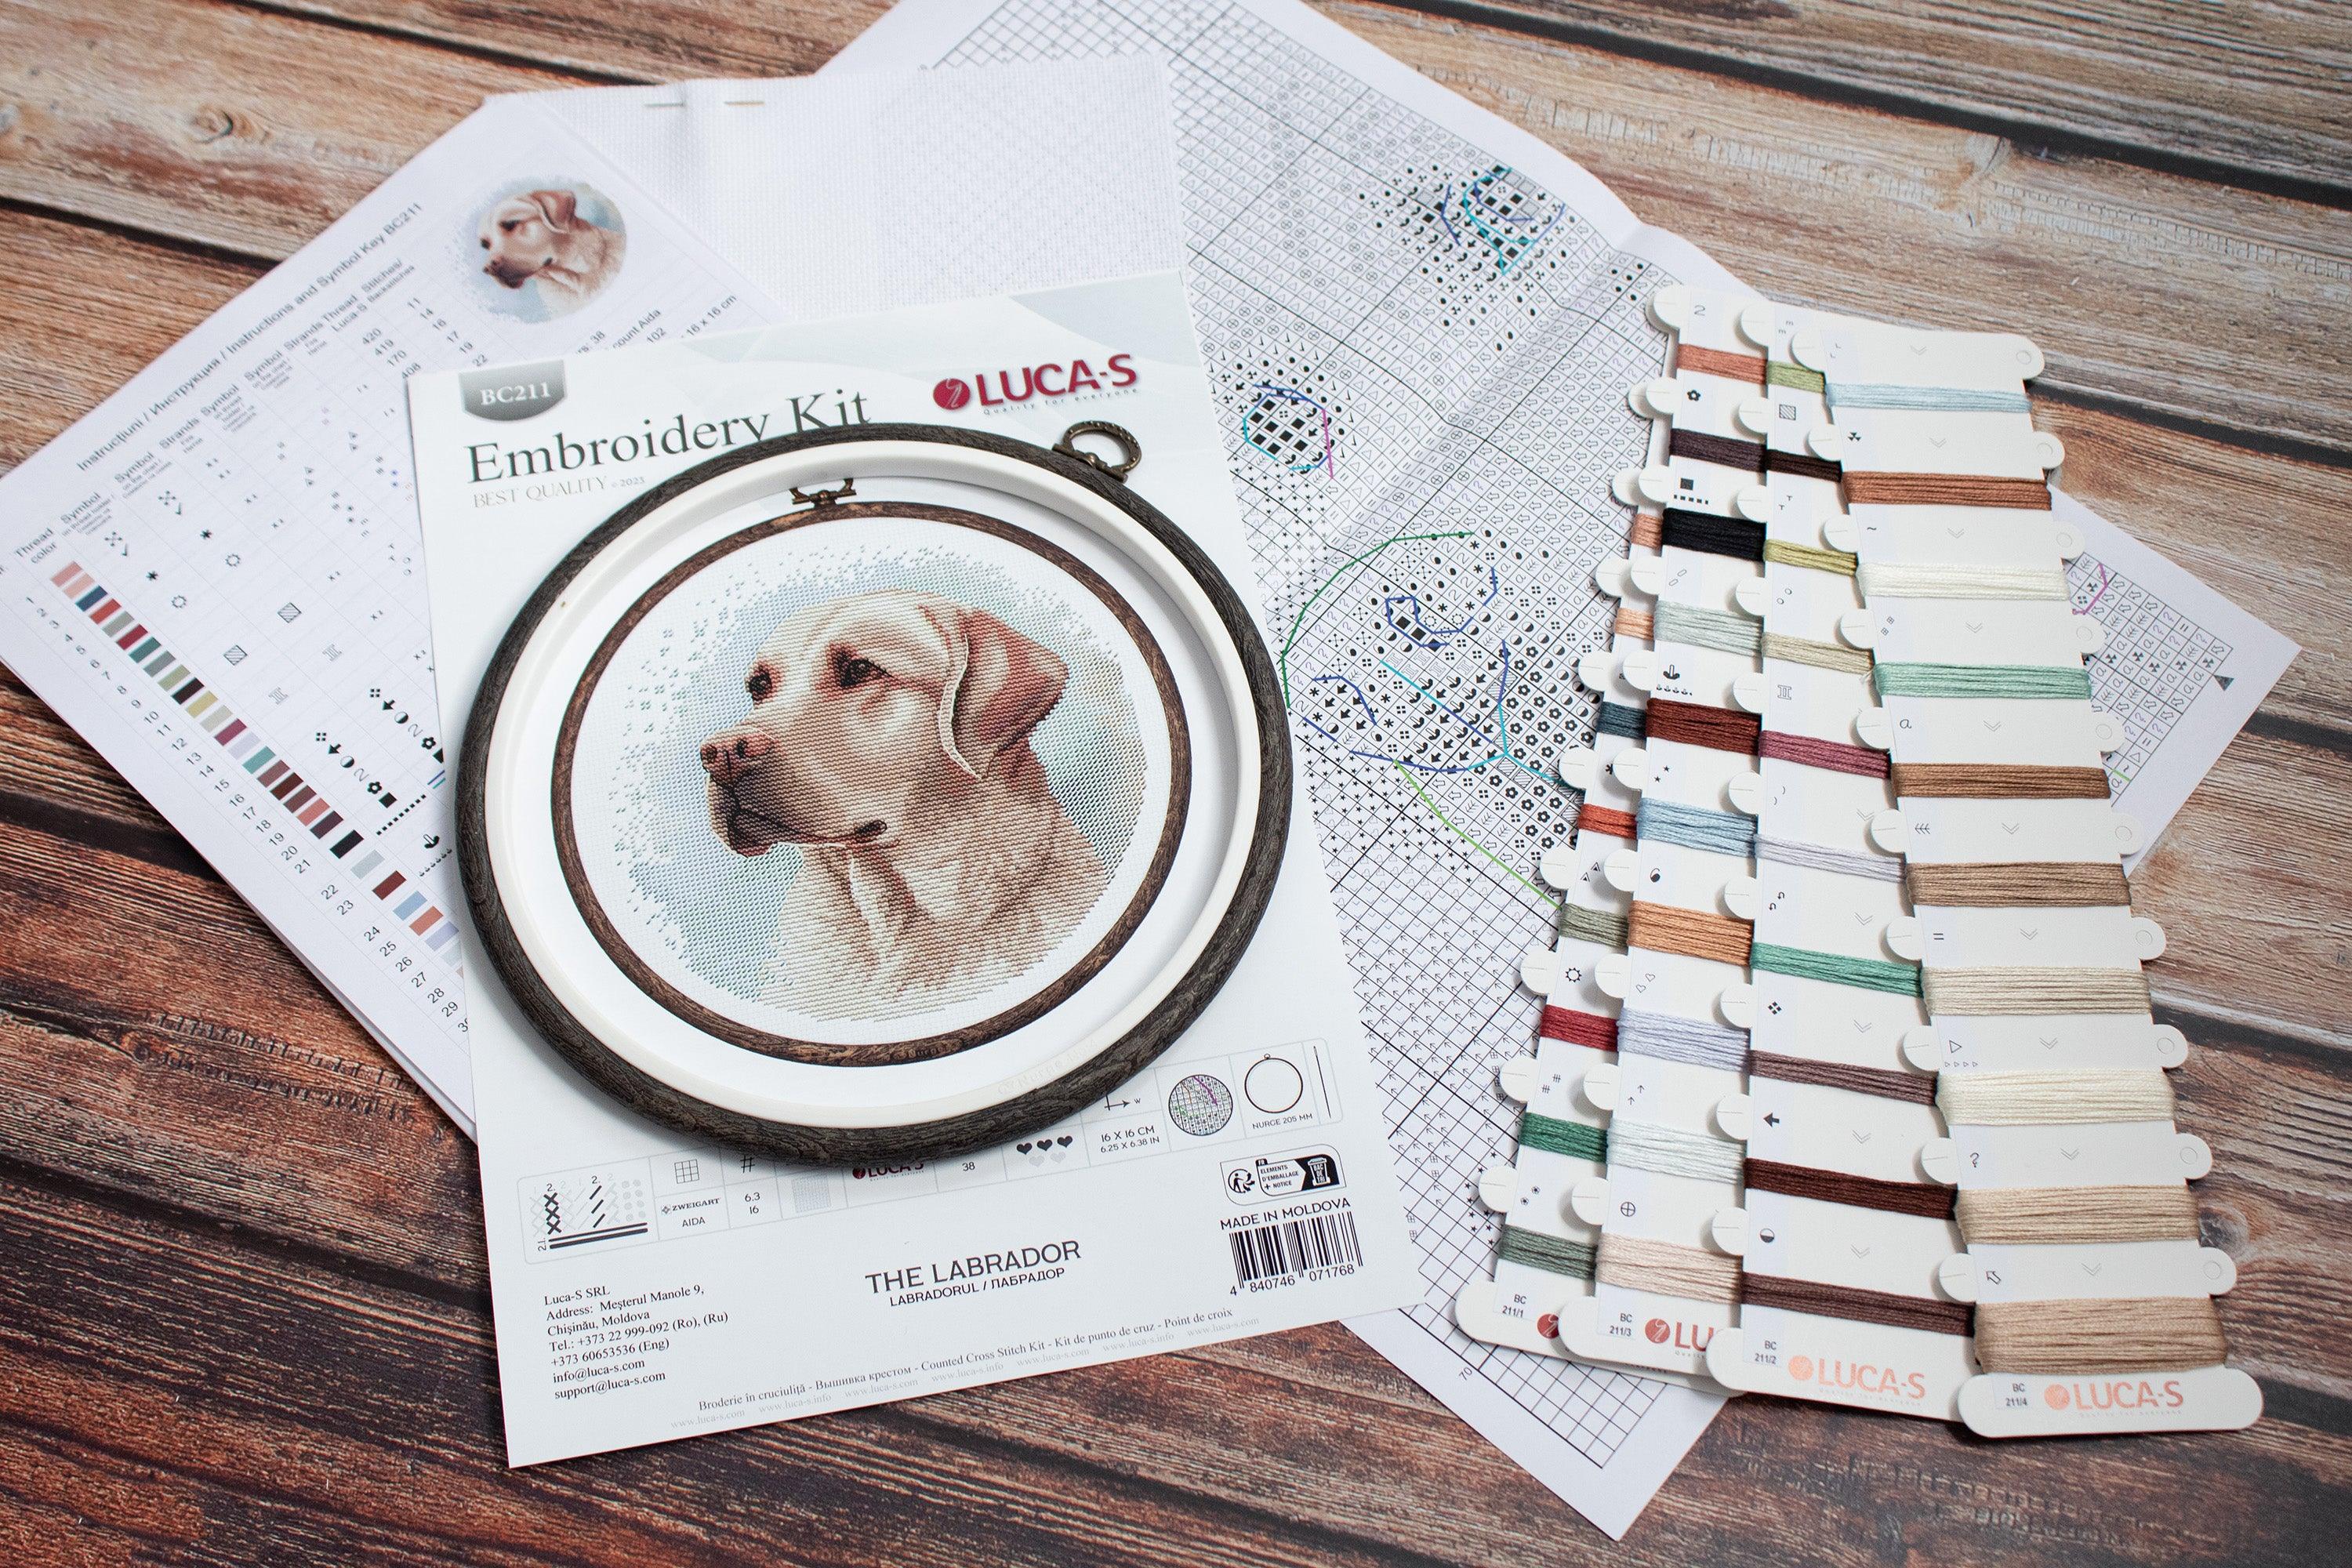 Cross Stitch Kit with Hoop Included Luca-S - BC211, The Labrador - Luca-S Cross Stitch Kits